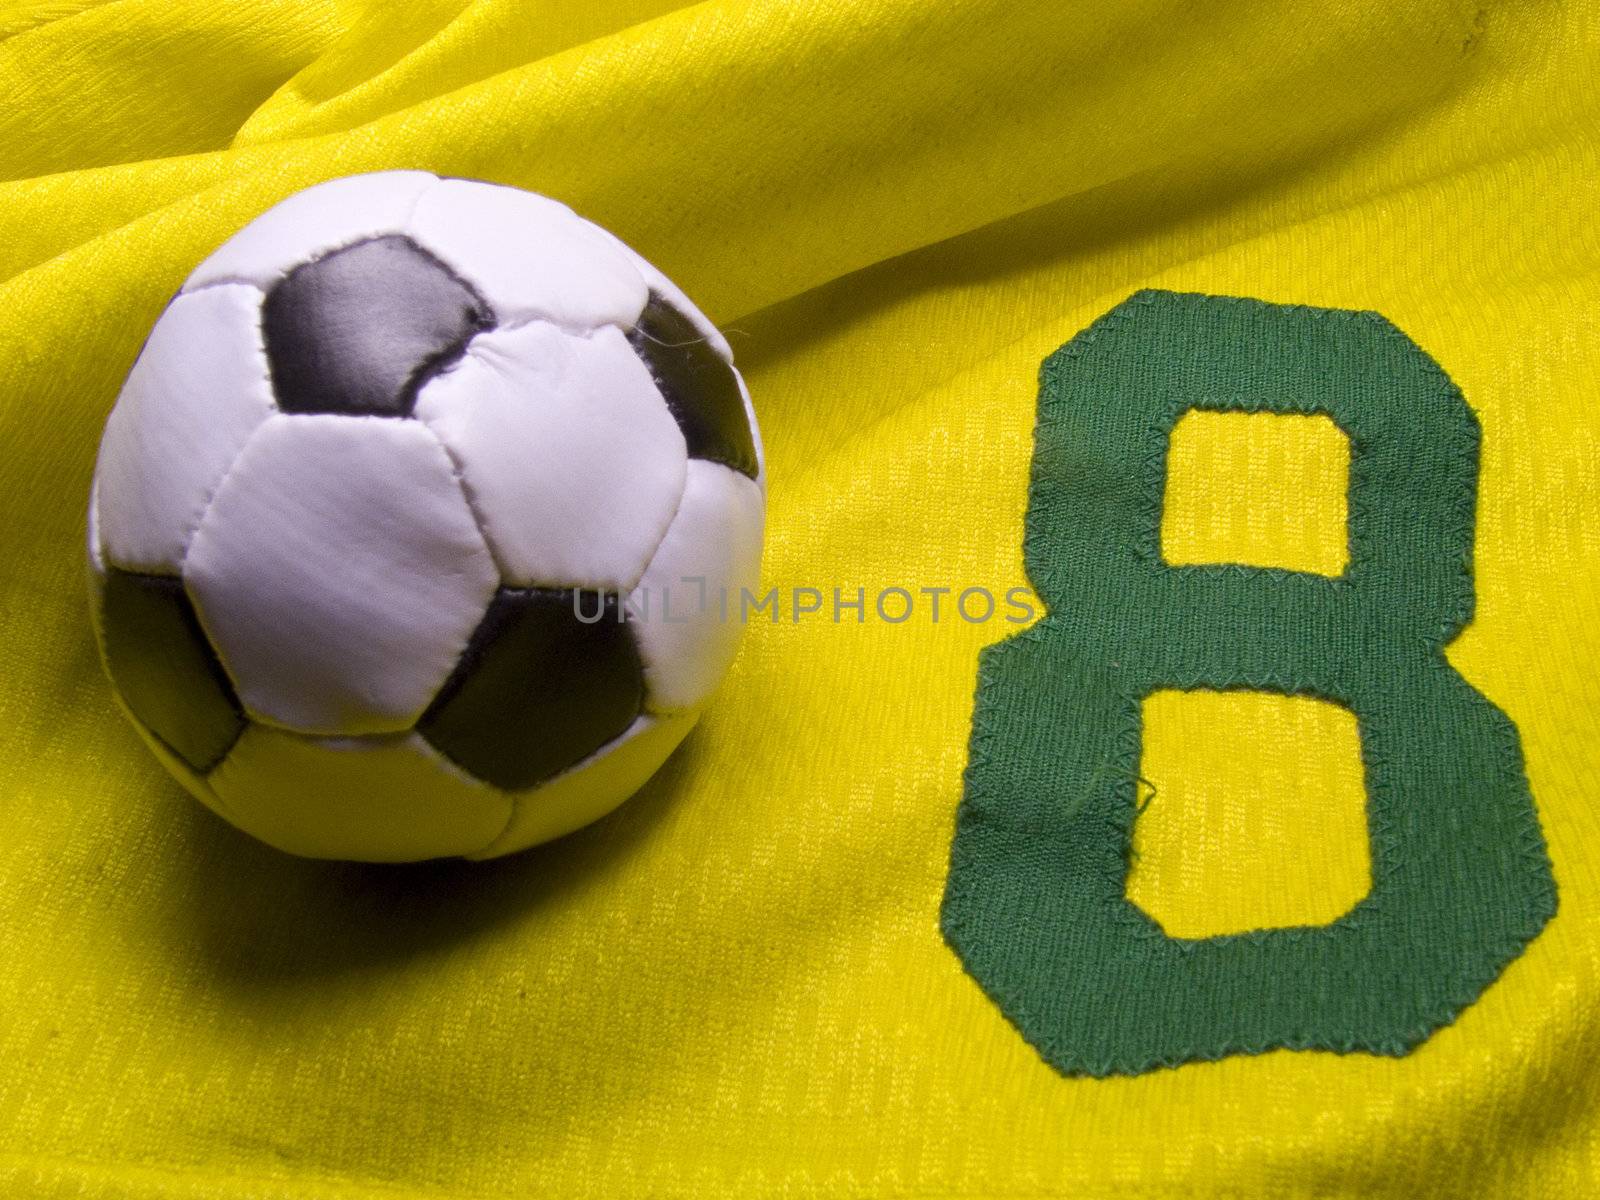 photo of the soccer ball over nuber eight uniform